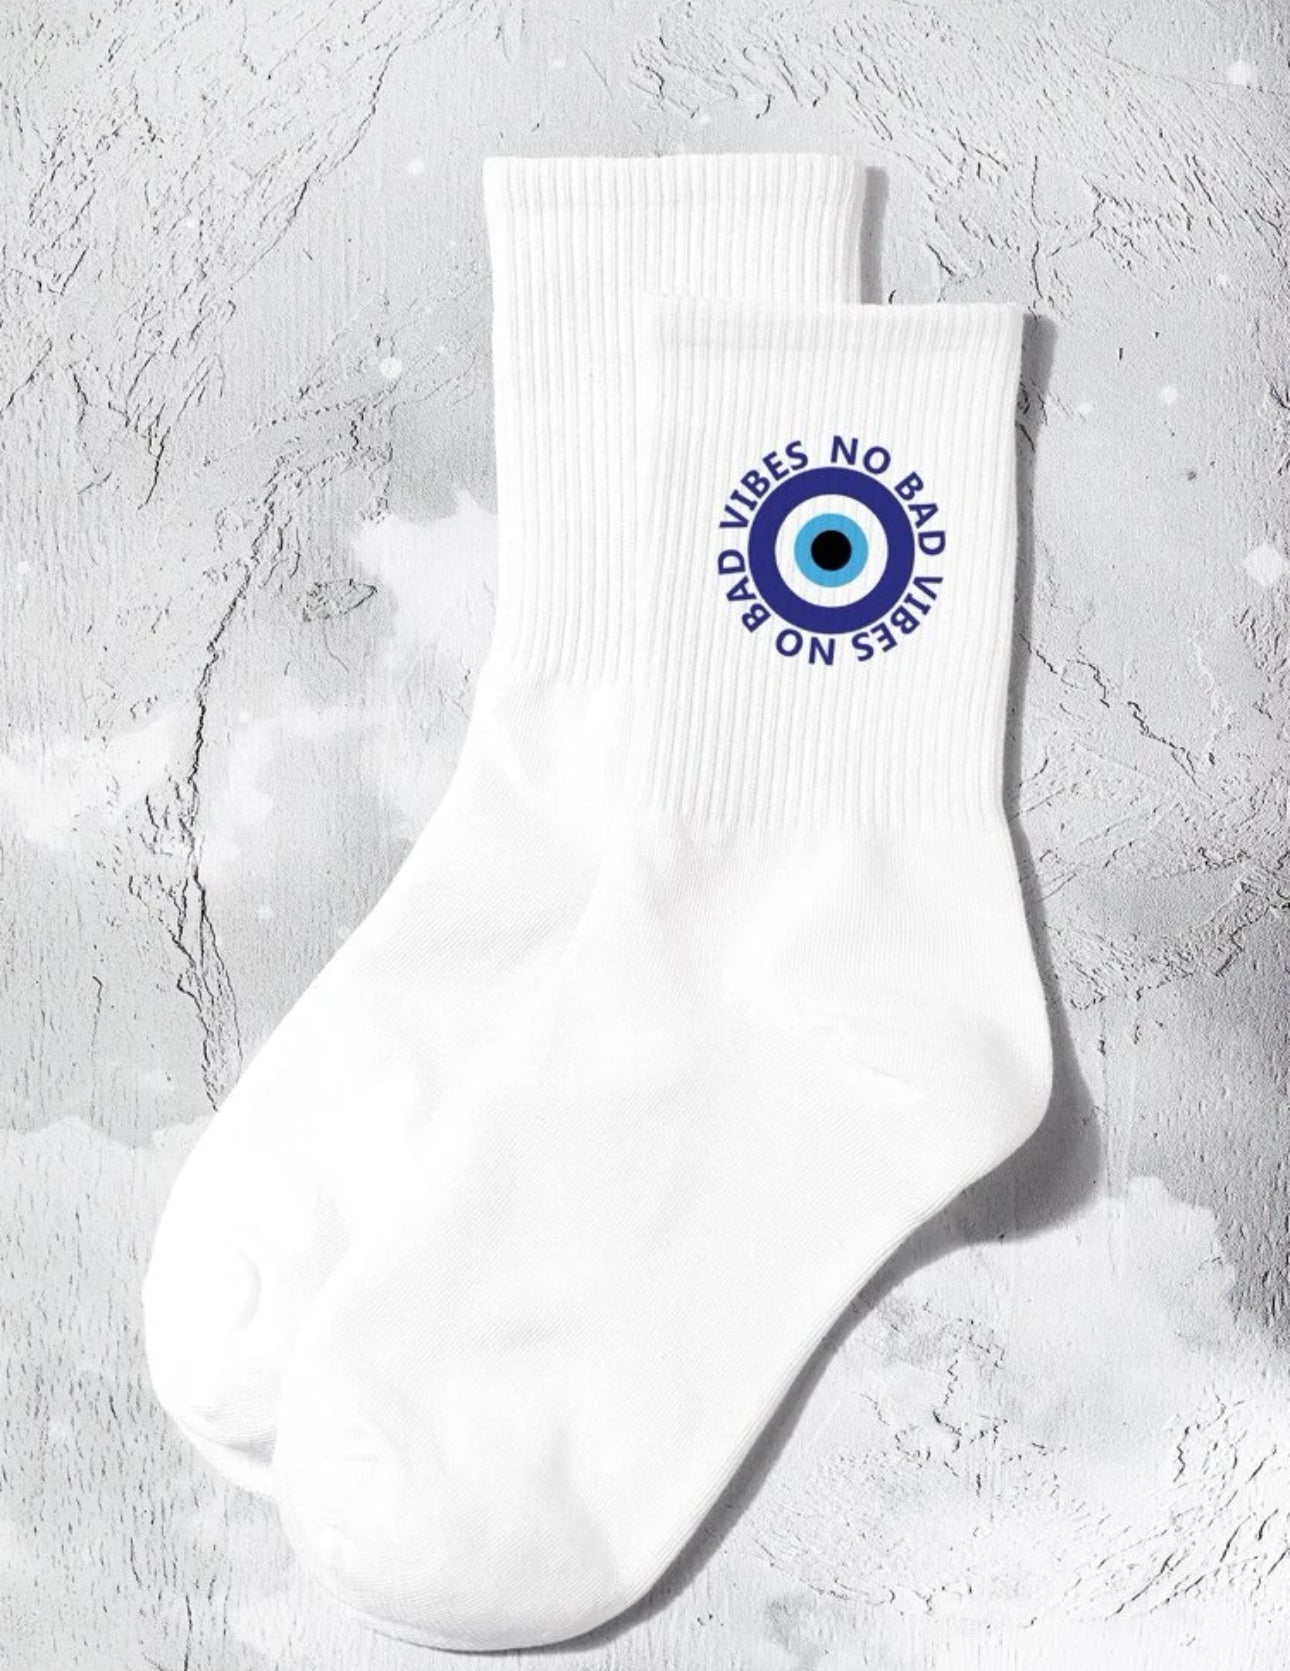 Socks No Bad Vibes with blue•Black Friday Sale